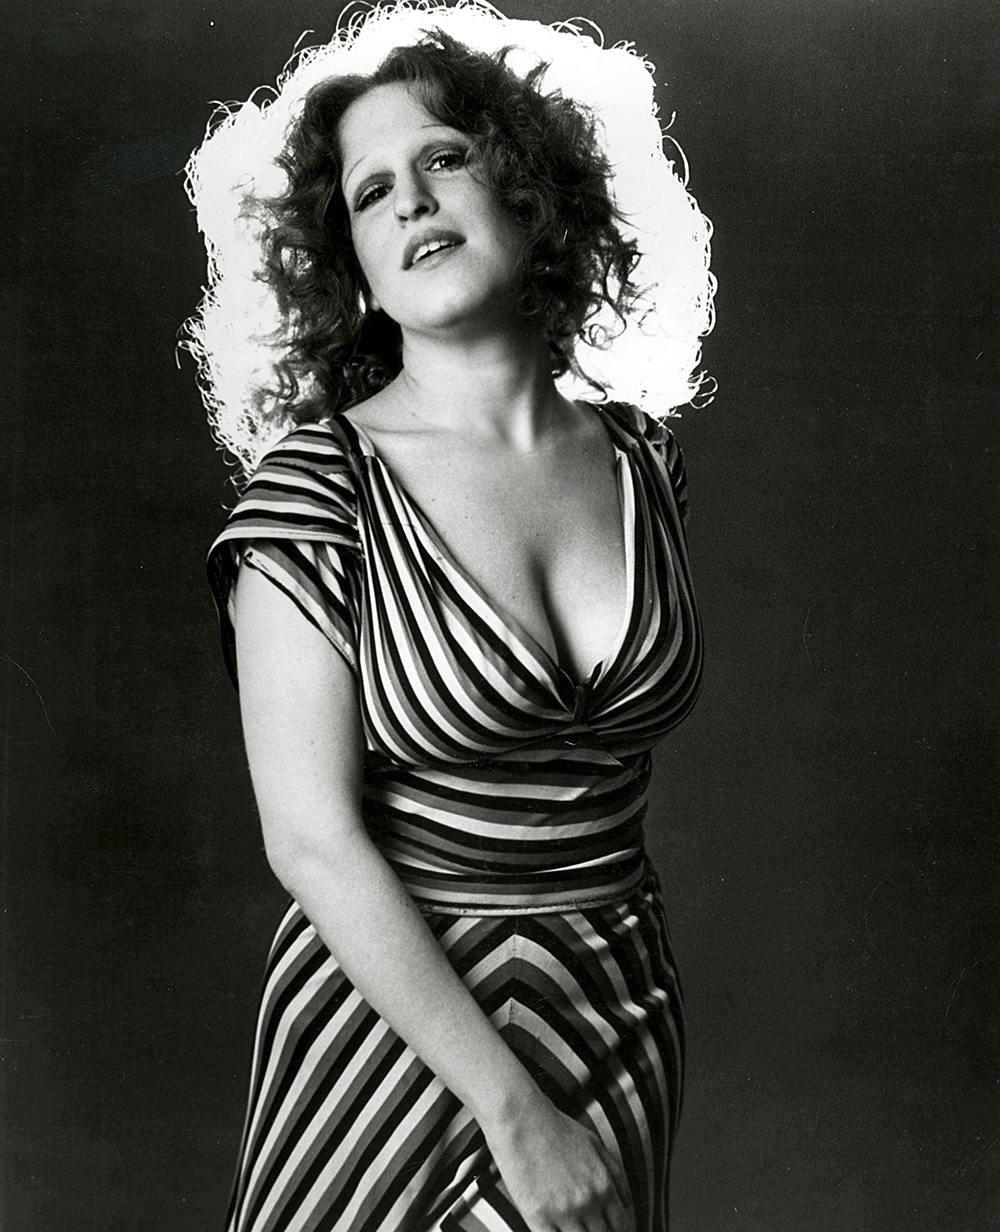 "Bette Midler: Then & Now,‘The Rose’,Bette Midler Plays Live Aid 1985,Bette Midler Gets Her Star On The Walk Of Fame,‘Beaches’,Bette Midler In 1988,Bette Midler In 1990,‘Hocus Pocus’,Bette Midler Plays Radio City Music Hall,Bette Midler At A DNC Benefit,Bette Midler Plays Boston,Bette Midler At The Premiere Of ‘The Stepford Wives’,Bette Midler At The Premiere Of The ‘Sex and the City’ Film,Bette Midler Plays The The Royal Variety Performance,Bette Midler At The 2014 Oscars,Bette Midler In 2018,Bette Midler At WSJ Magazine’s 2019 Innovator Awards,Bette Midler At The 2021 Kennedy Center Honors,Bette Midler At The Premiere Of ‘Hocus Pocus 2’, Bette Midler Is 77: Photos Of The Broadway & Movie Star Through The Years"